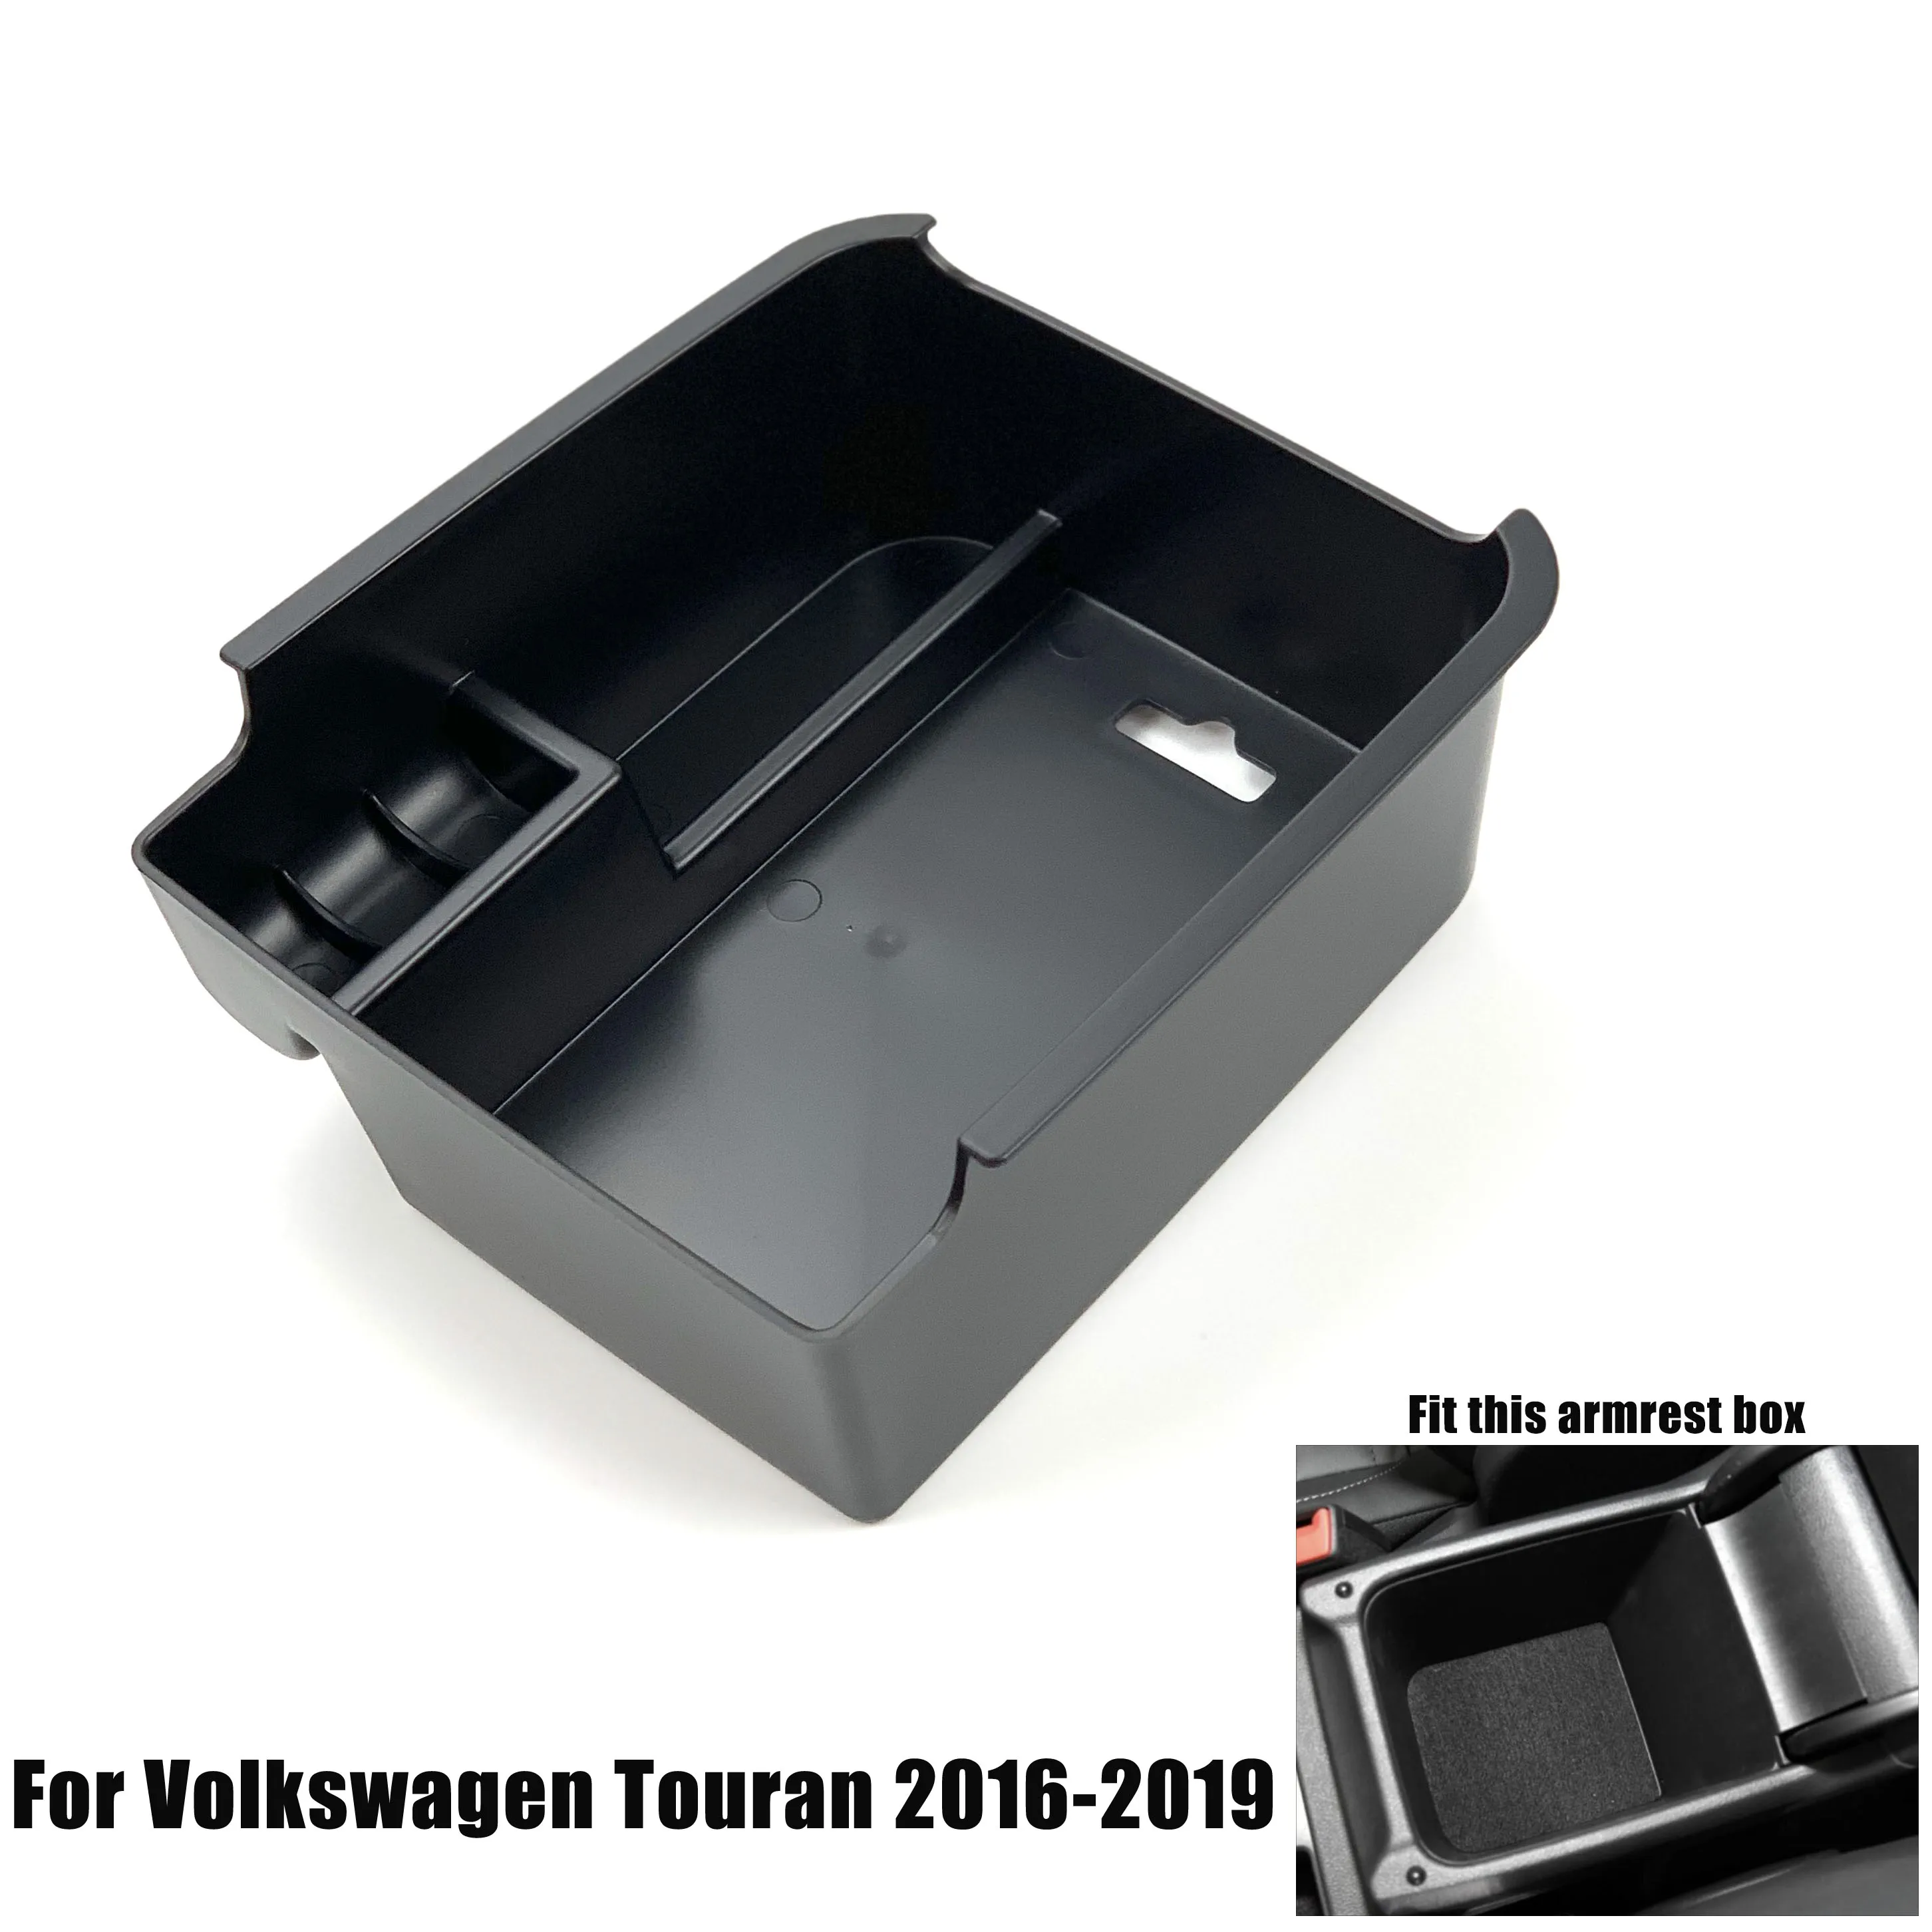 

For Volkswagen Touran 2016-2019 Central Armrest Storage Box Container Holder Tray Car Organizer Accessories Car Styling